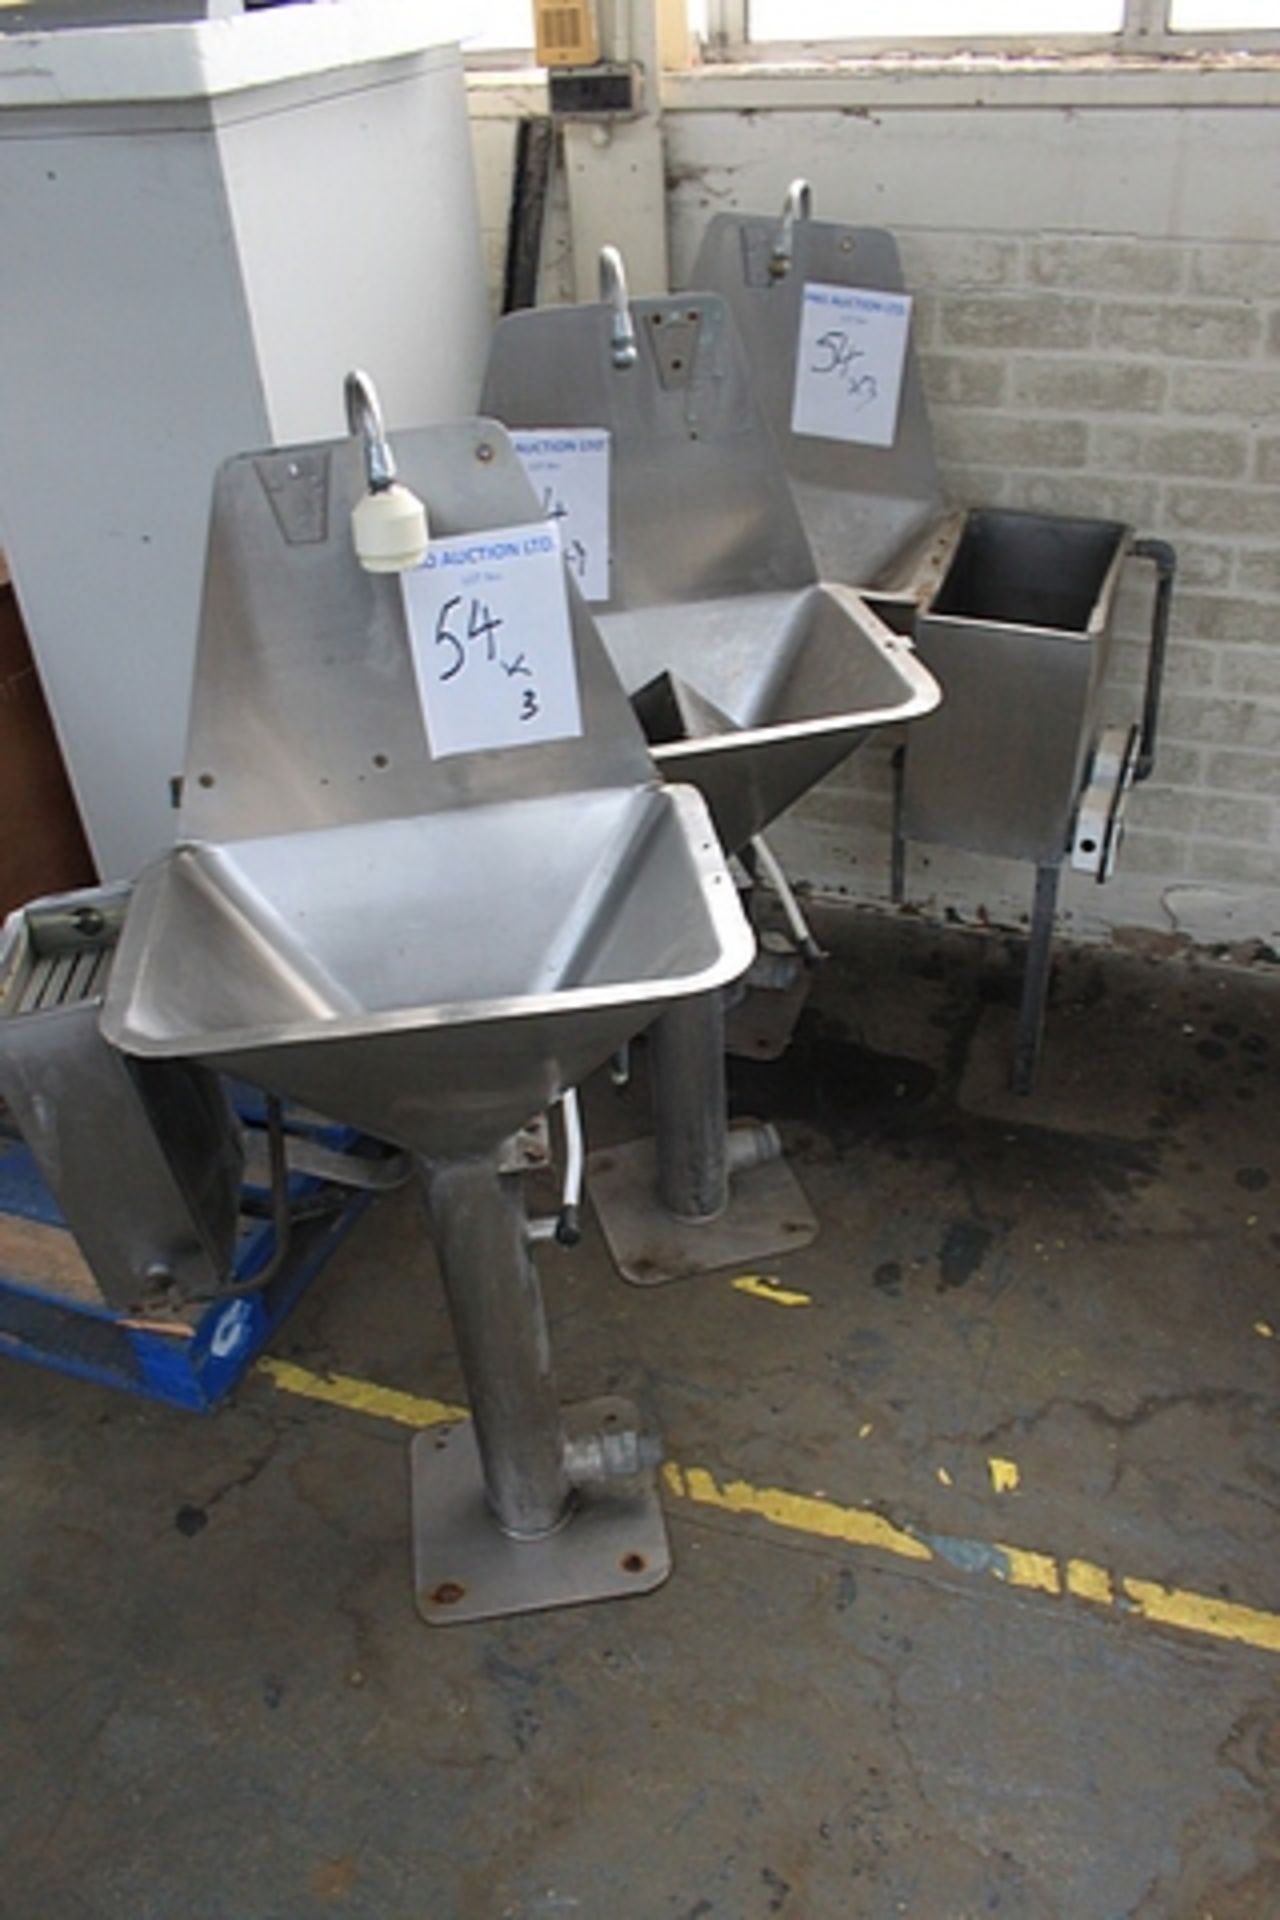 3 x knee operated floor standing sink complete with sterilizer